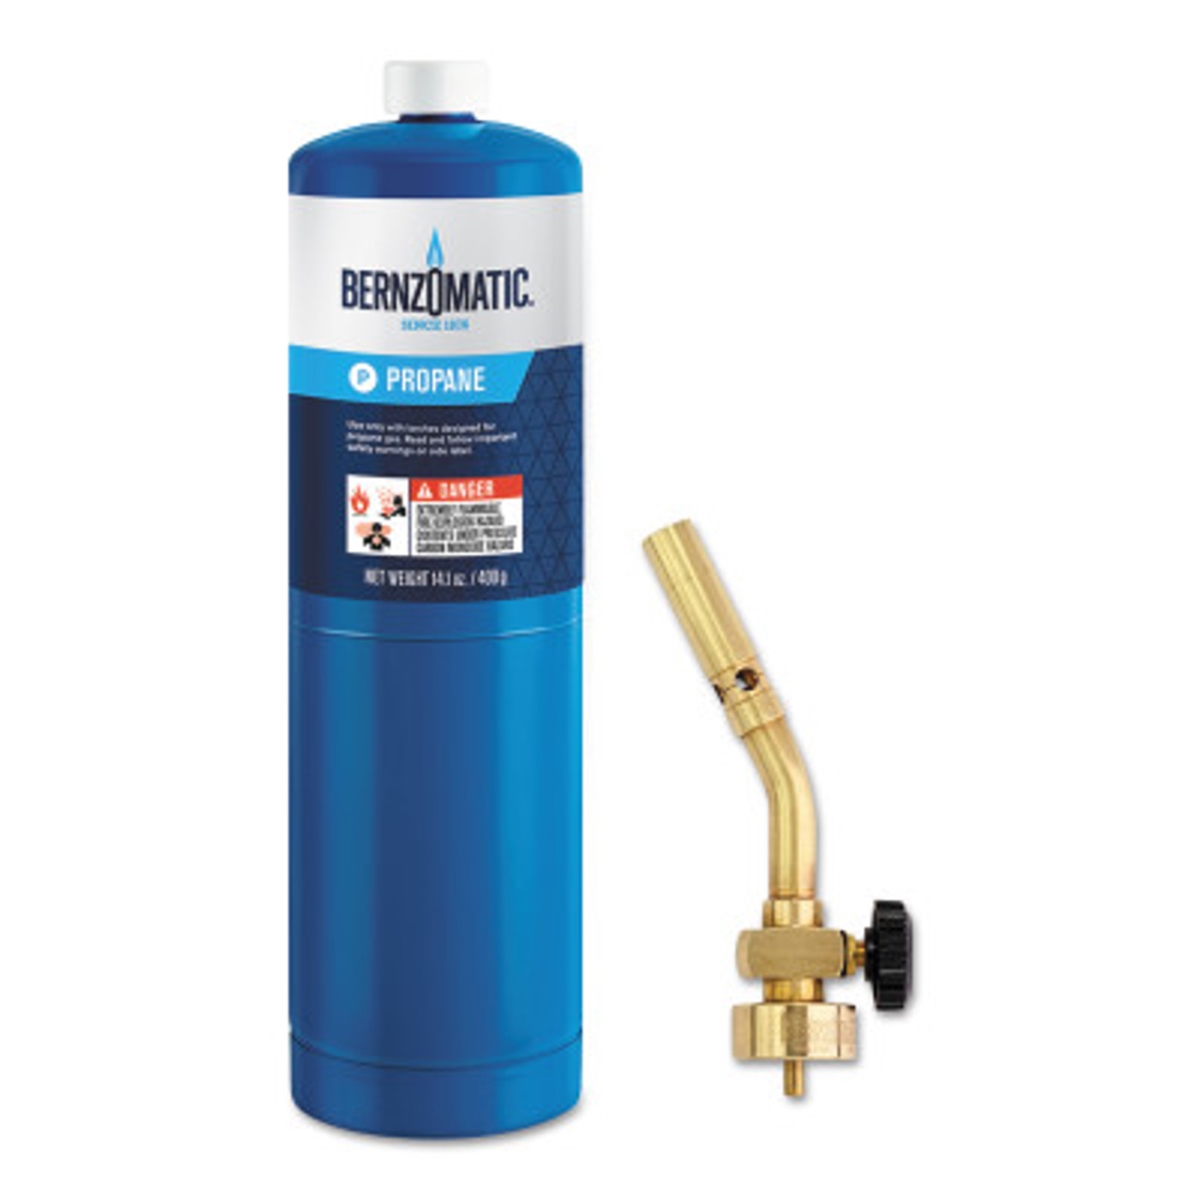 Picture of Worthington Cylinders 189-368374 14 oz UL100 Basic Pencil Propane Flame Torch Kit